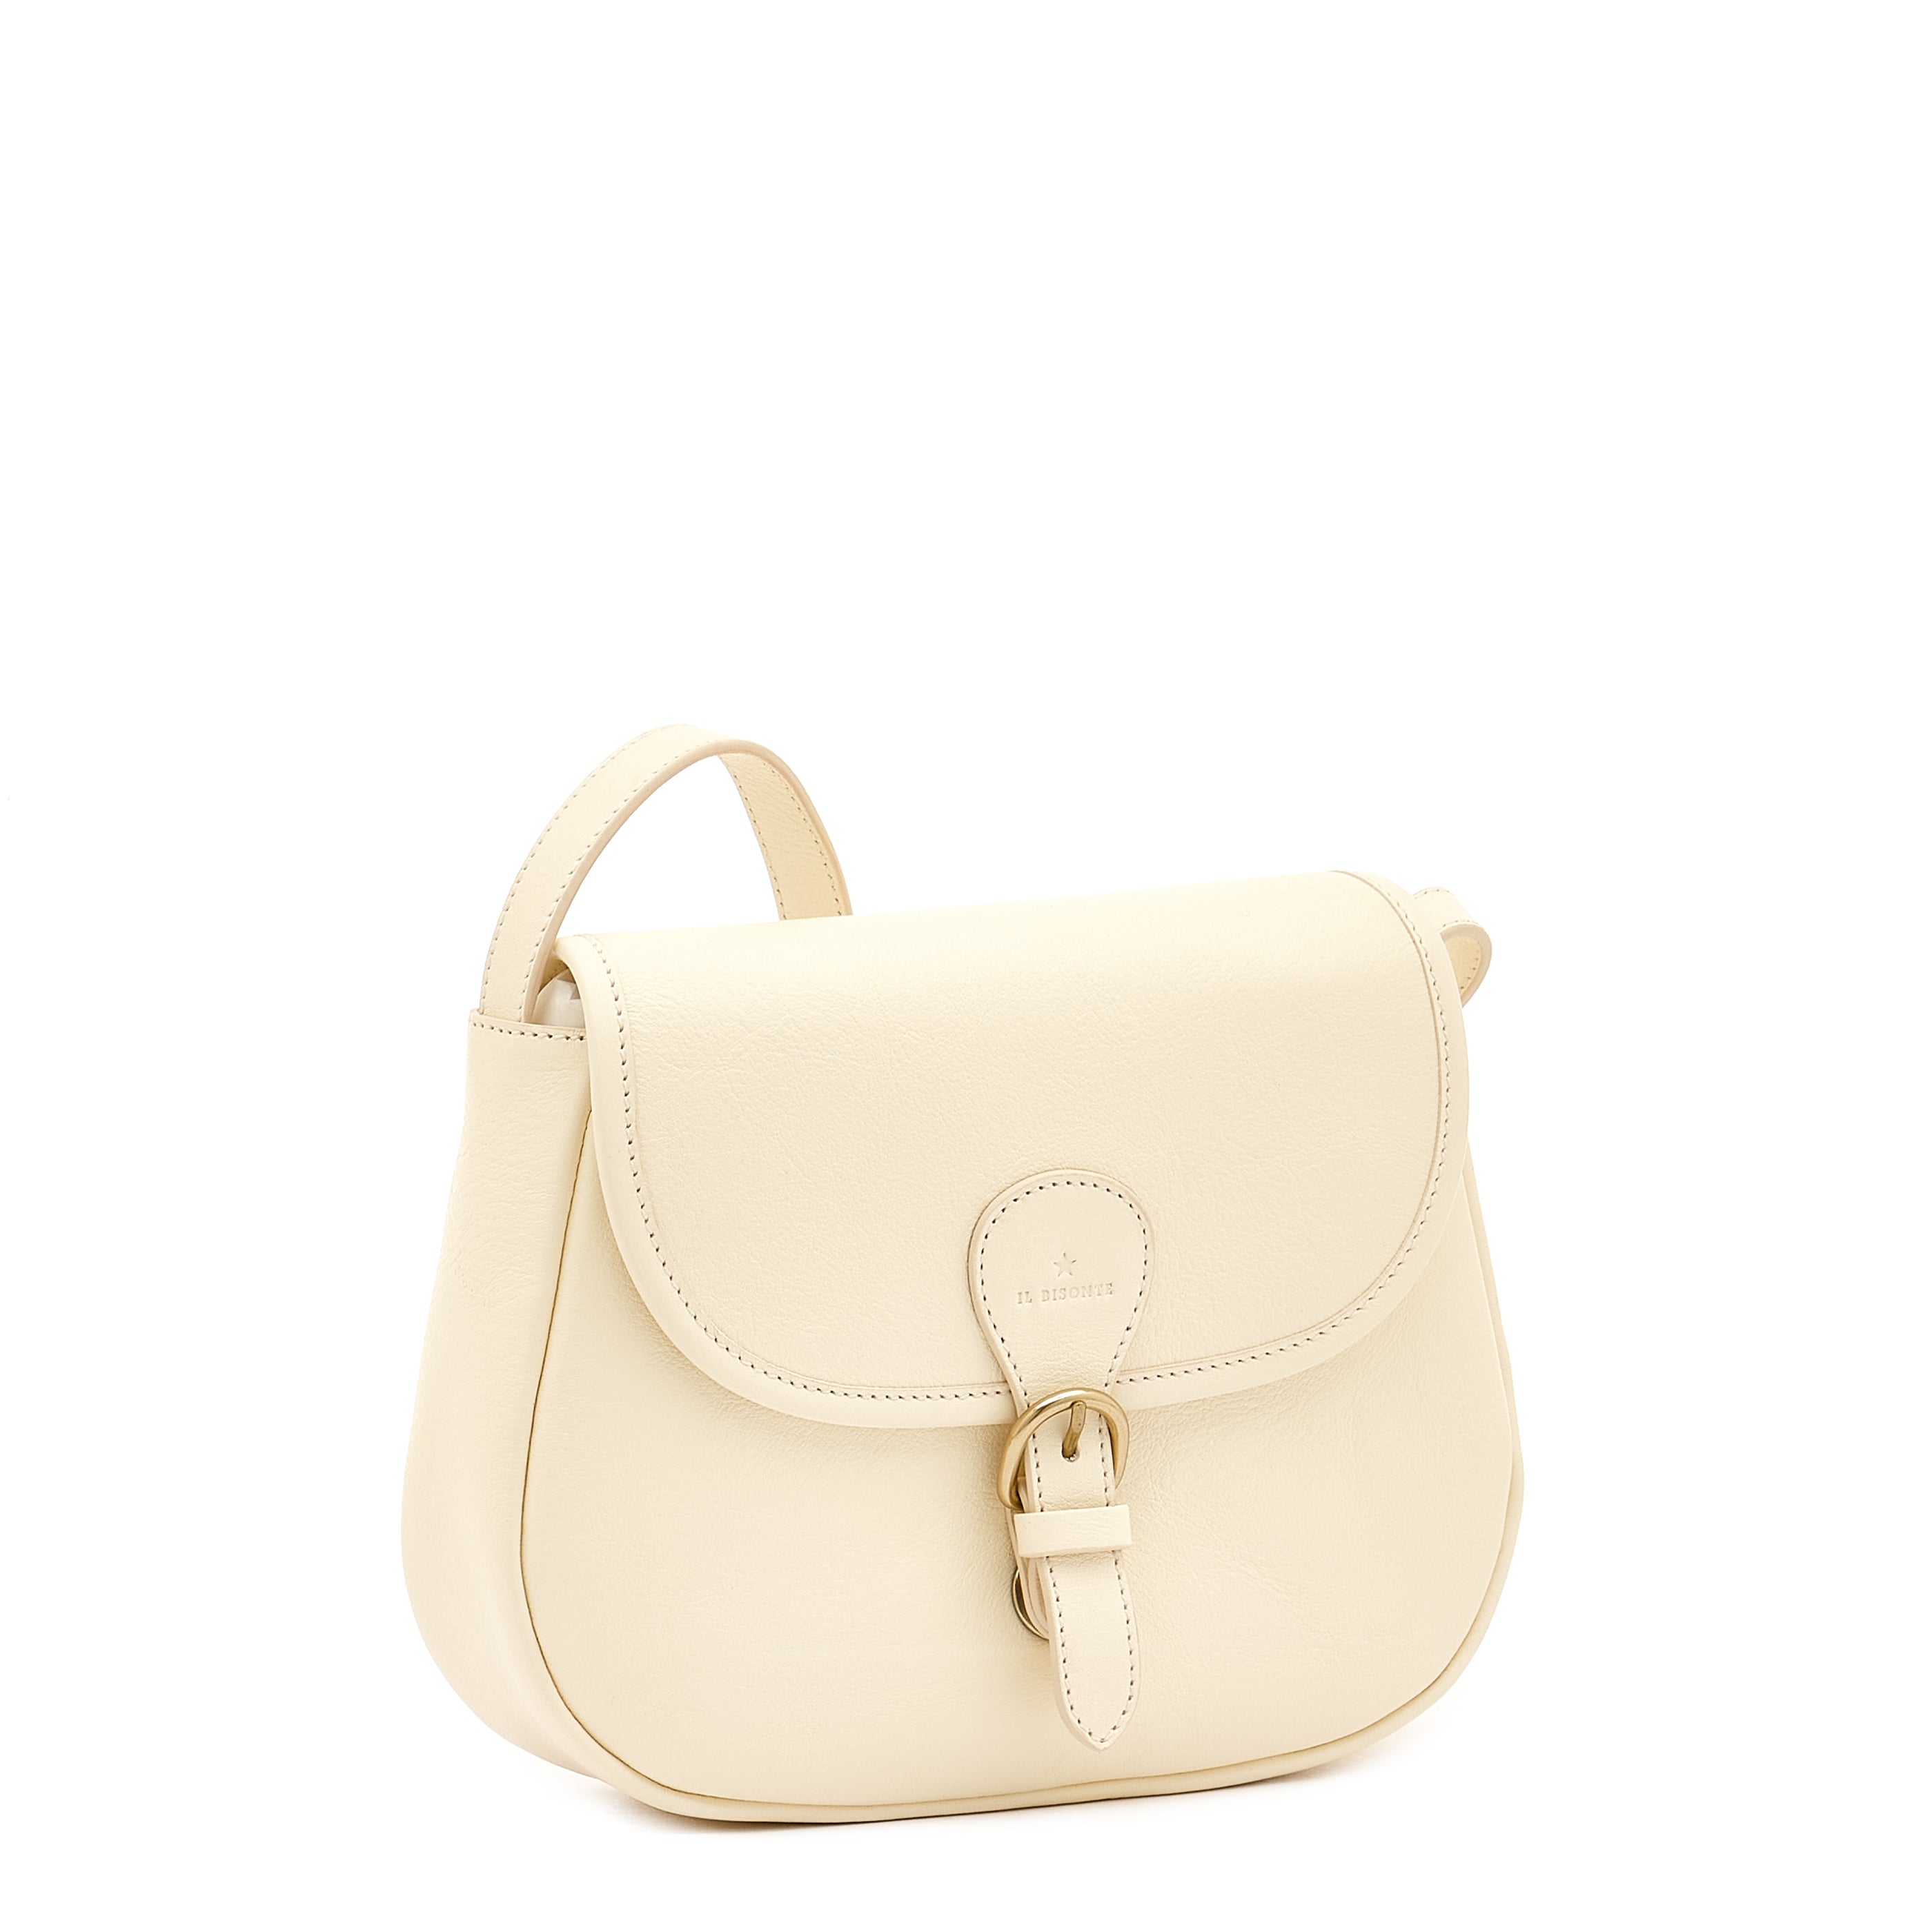 Novecento | Women's crossbody bag in leather color white